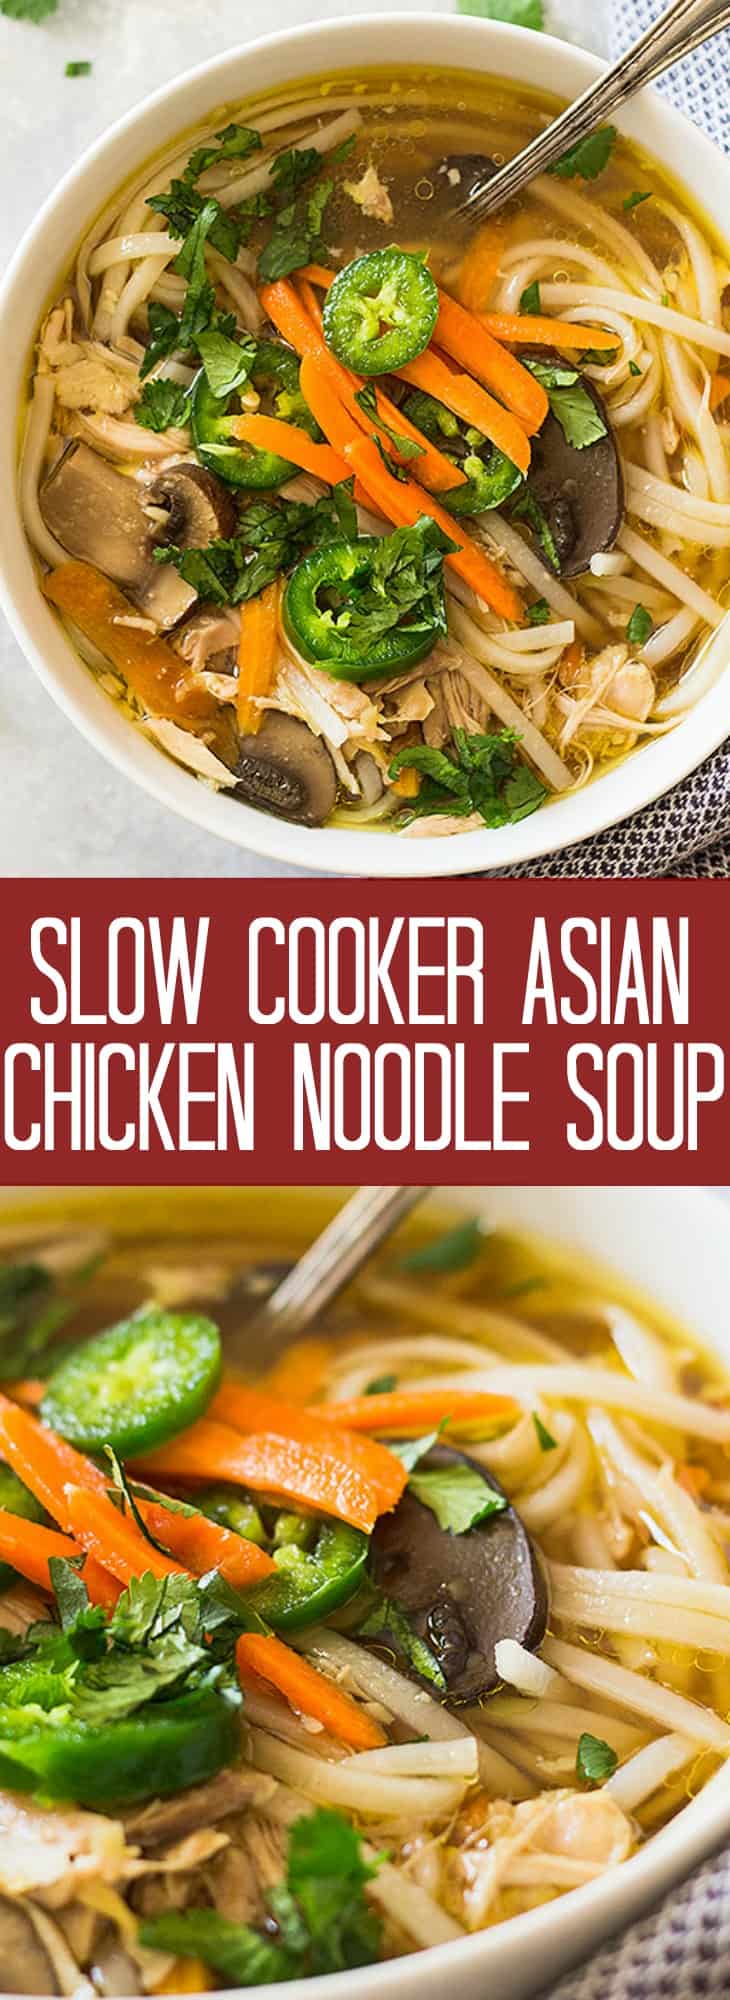 This Slow Cooker Asian Chicken Noodle Soup puts a twist on the classic. With a flavorful broth, mushrooms, ginger, garlic and noodles! | www.countrysidecravings.com